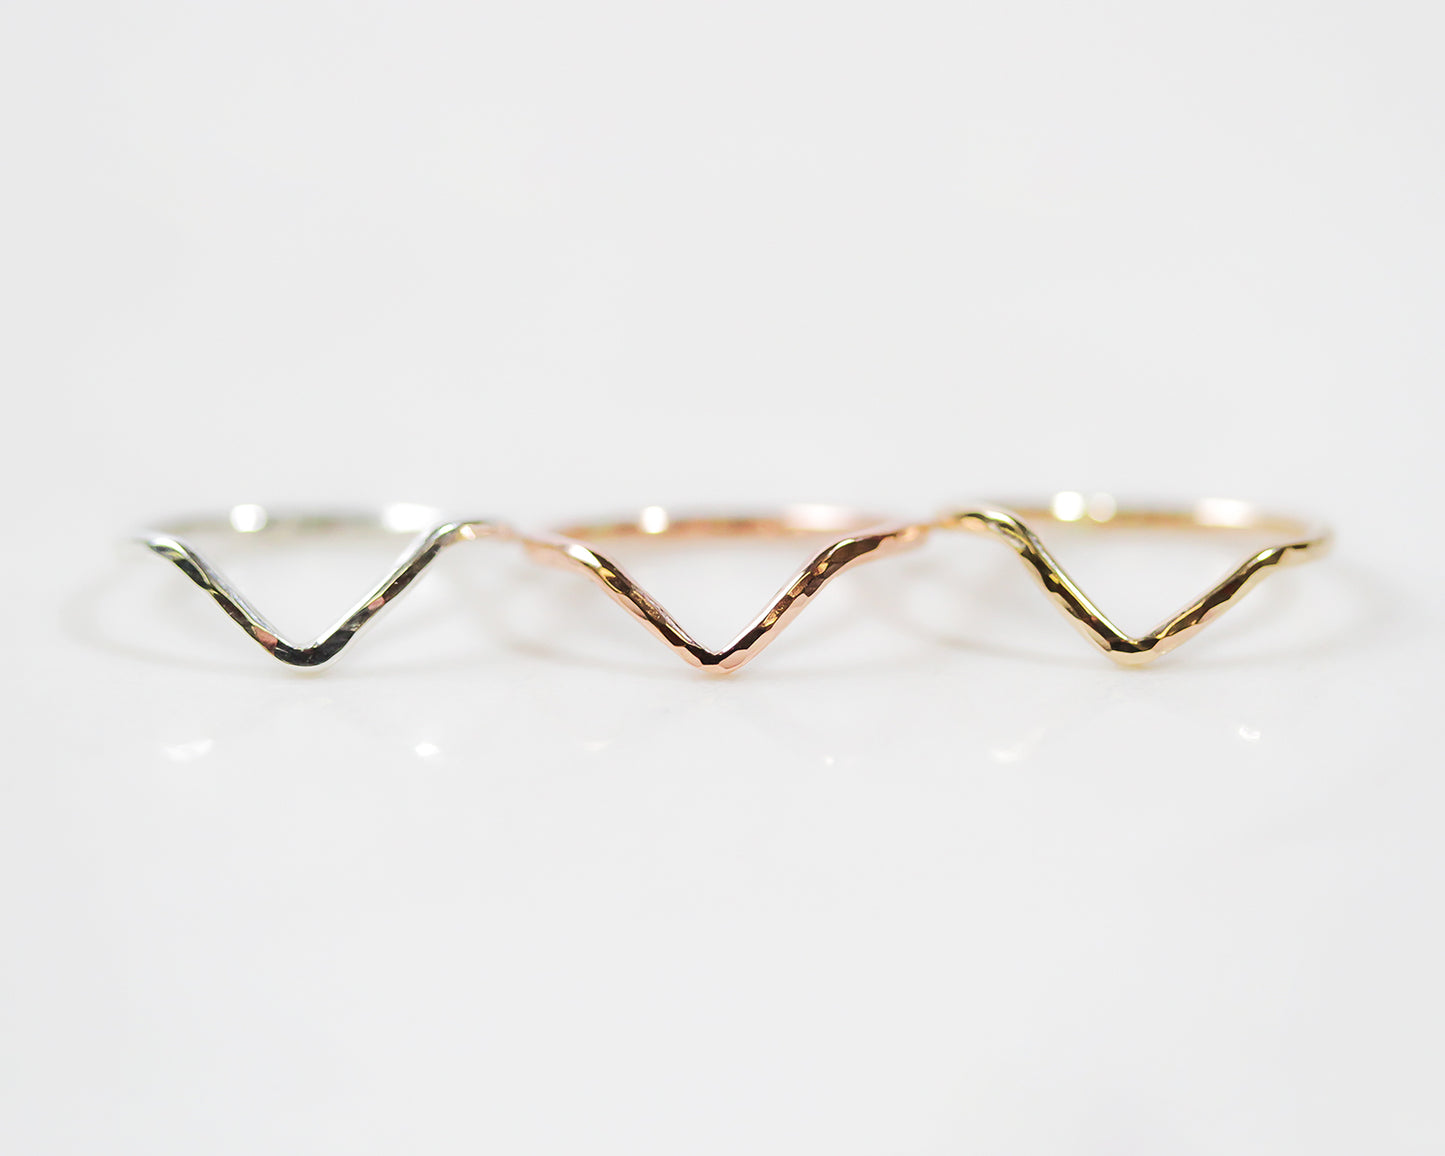 This minimalist V shaped ring is strong and bold, delicate and wearable. Image shows close up of the Chevron Ring in all metal selects, rose and gold fill and sterling silver. The ring is hand hammered which offers a delicate sparkle.